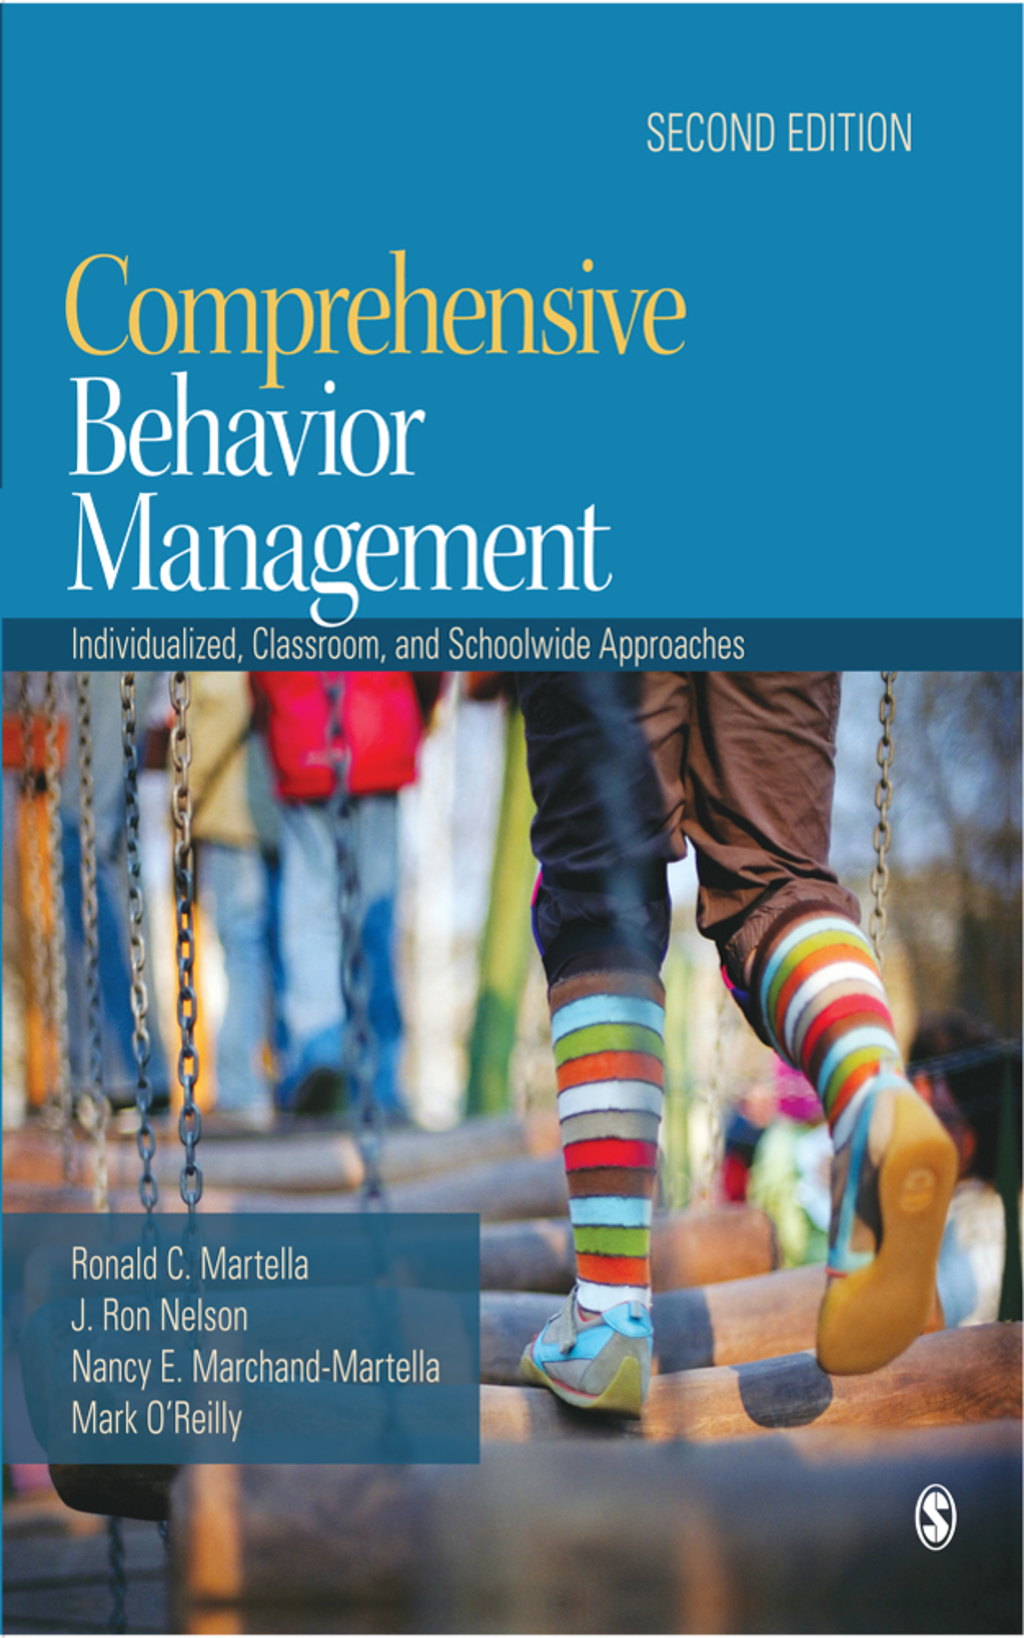 Comprehensive Behavior Management: Individualized  Classroom  and Schoolwide Approaches (eBook) - Ronald C. Martella; J. Ron Nelson; Nancy E. Marchand-Martella; Mark O'Reilly